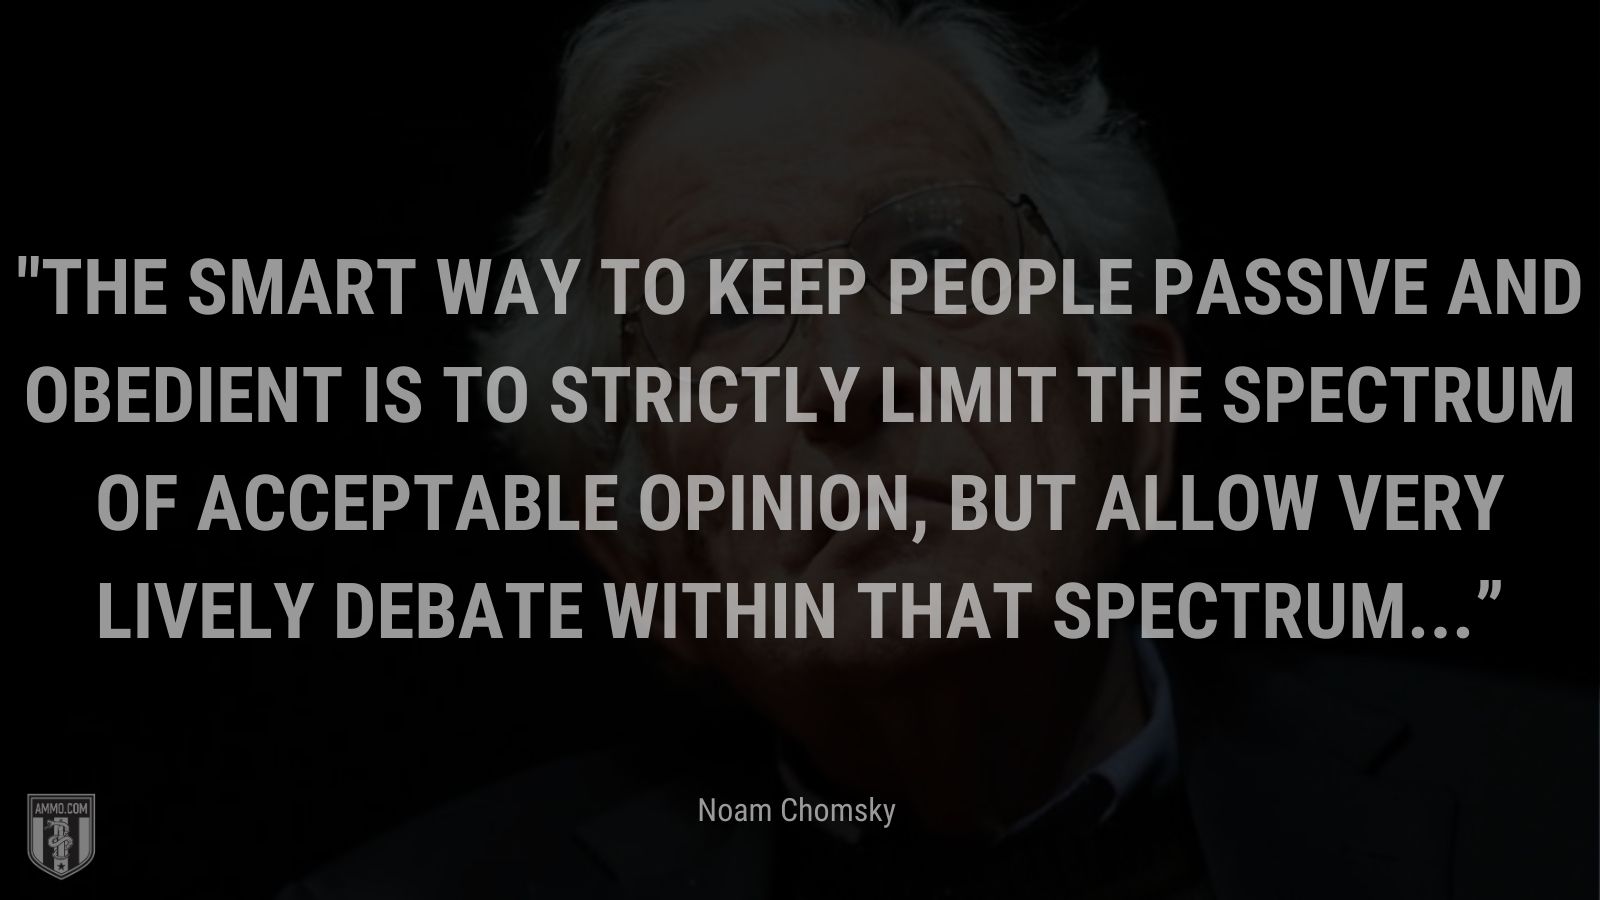 “The smart way to keep people passive and obedient is to strictly limit the spectrum of acceptable opinion, but allow very lively debate within that spectrum...” - Noam Chomsky